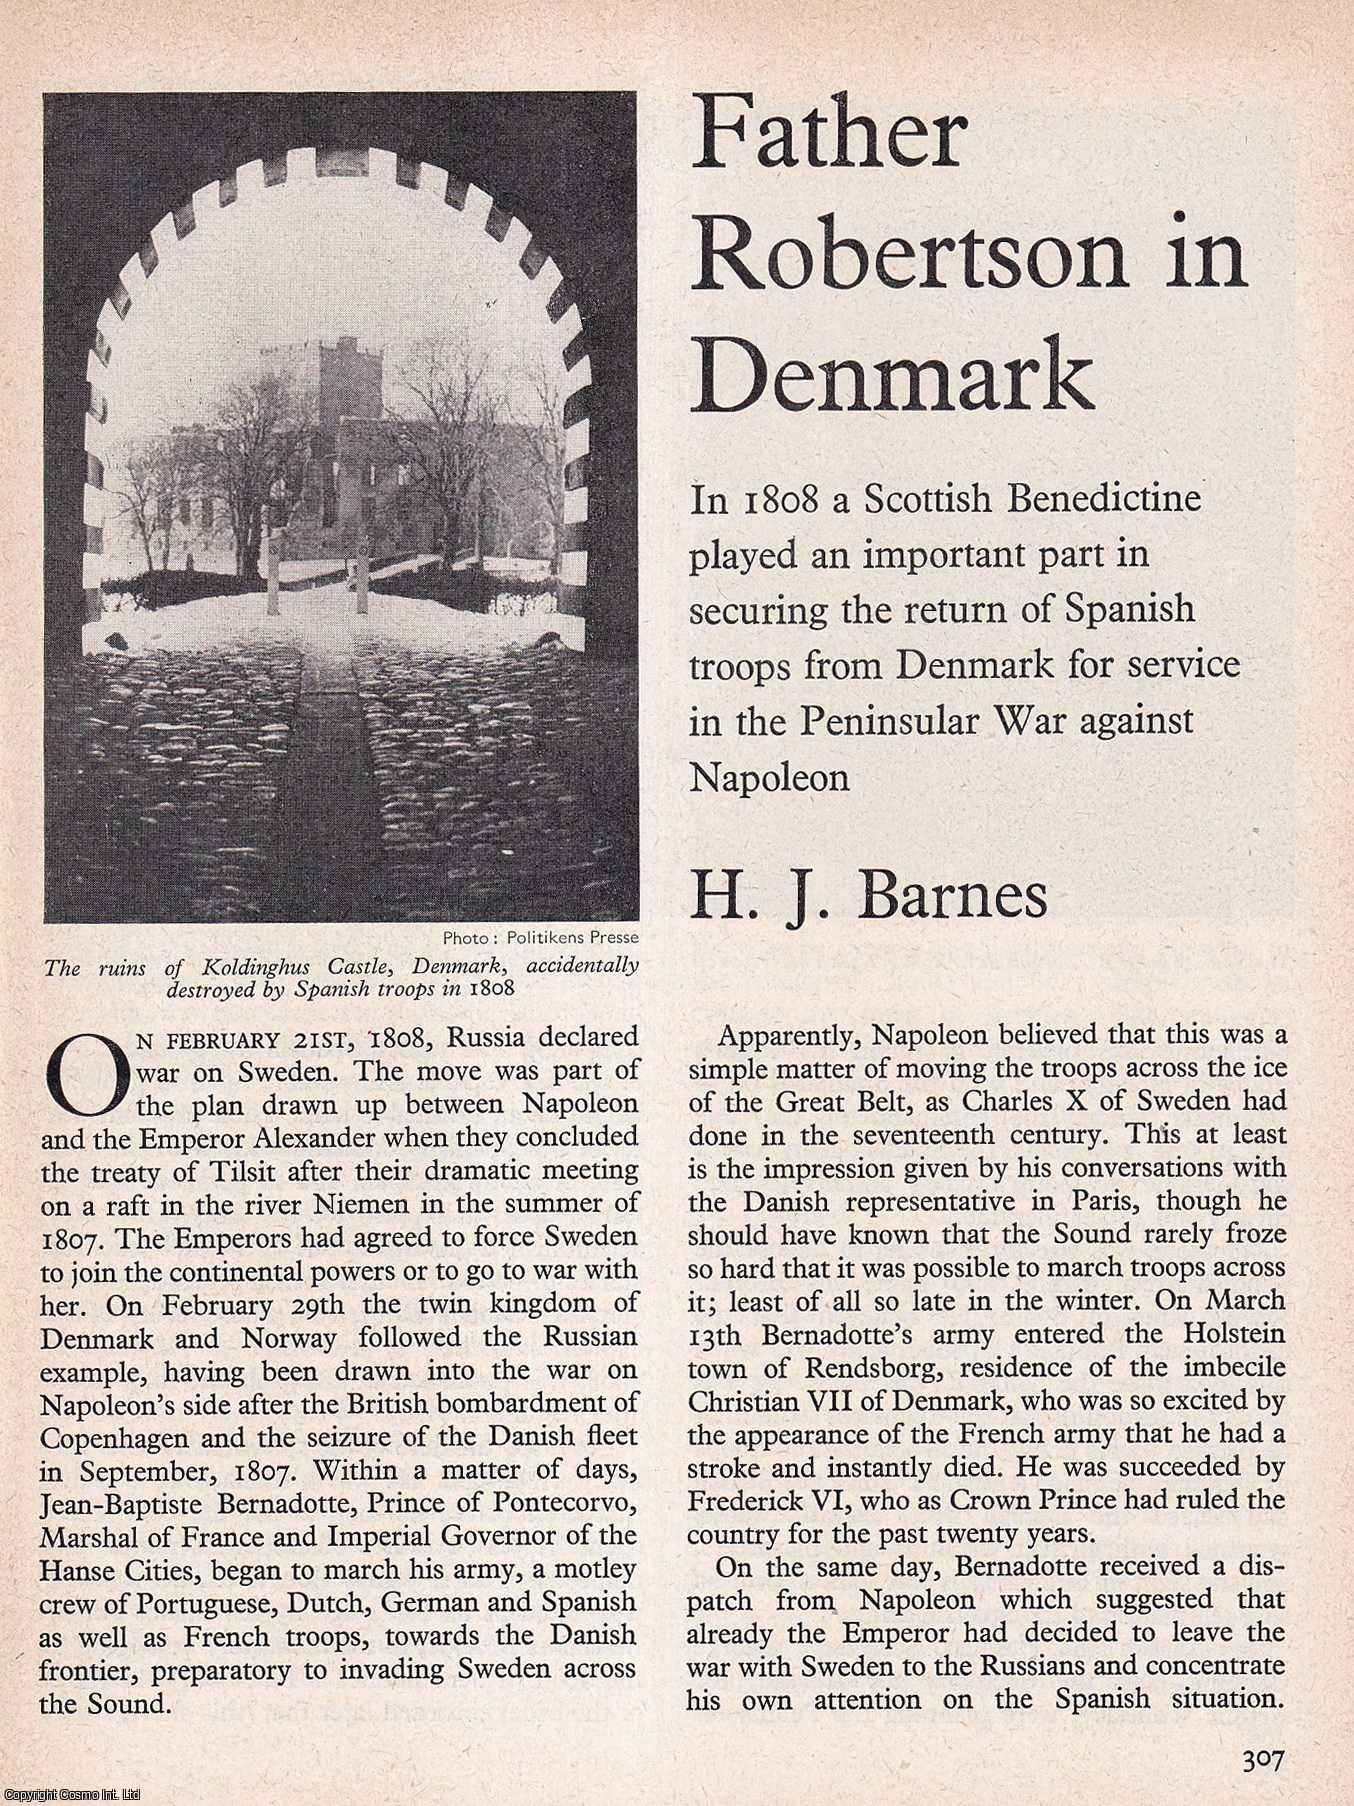 H.J. Barnes - Father Robertson in Denmark. An original article from History Today magazine, 1968.